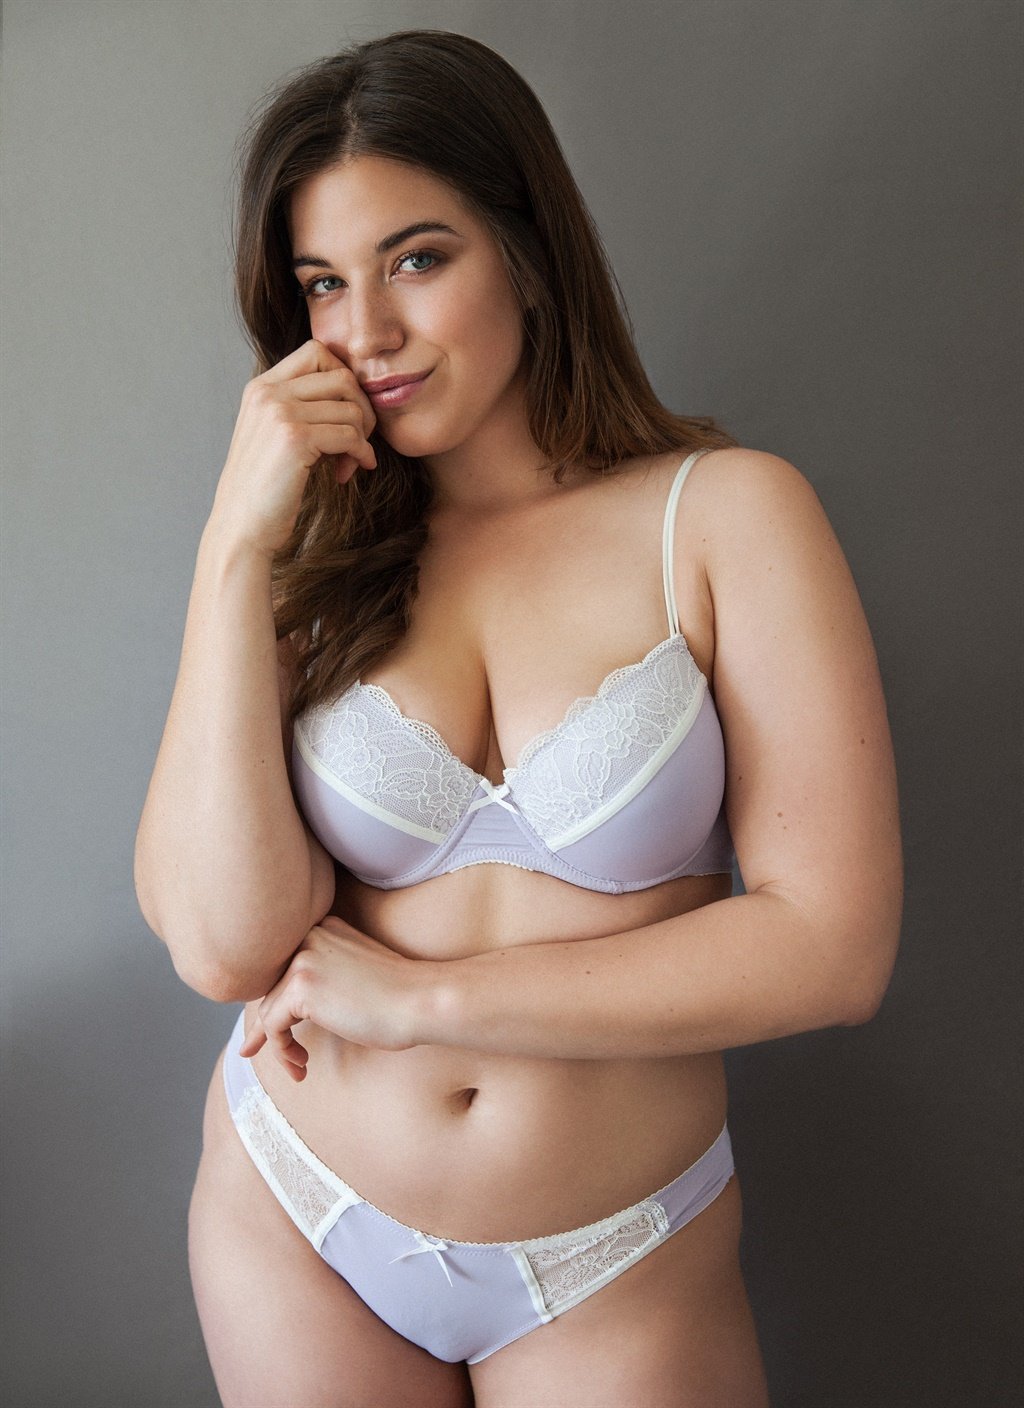 Large Woman Teen Site